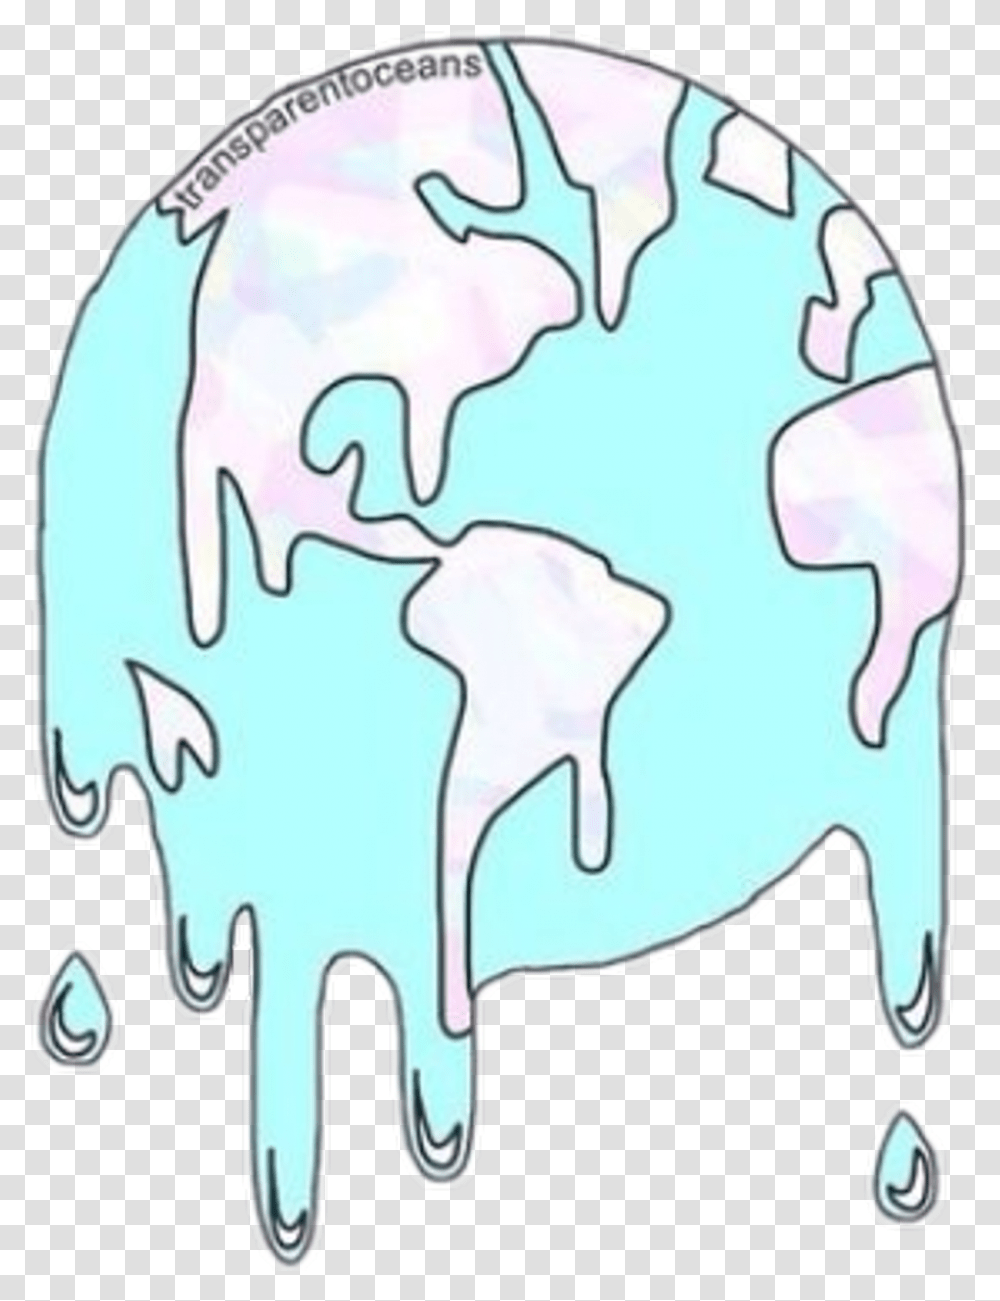 World Water Dripping Cute Tumblr Stickers For Snapchat Streaks, Outer Space, Astronomy, Universe, Planet Transparent Png